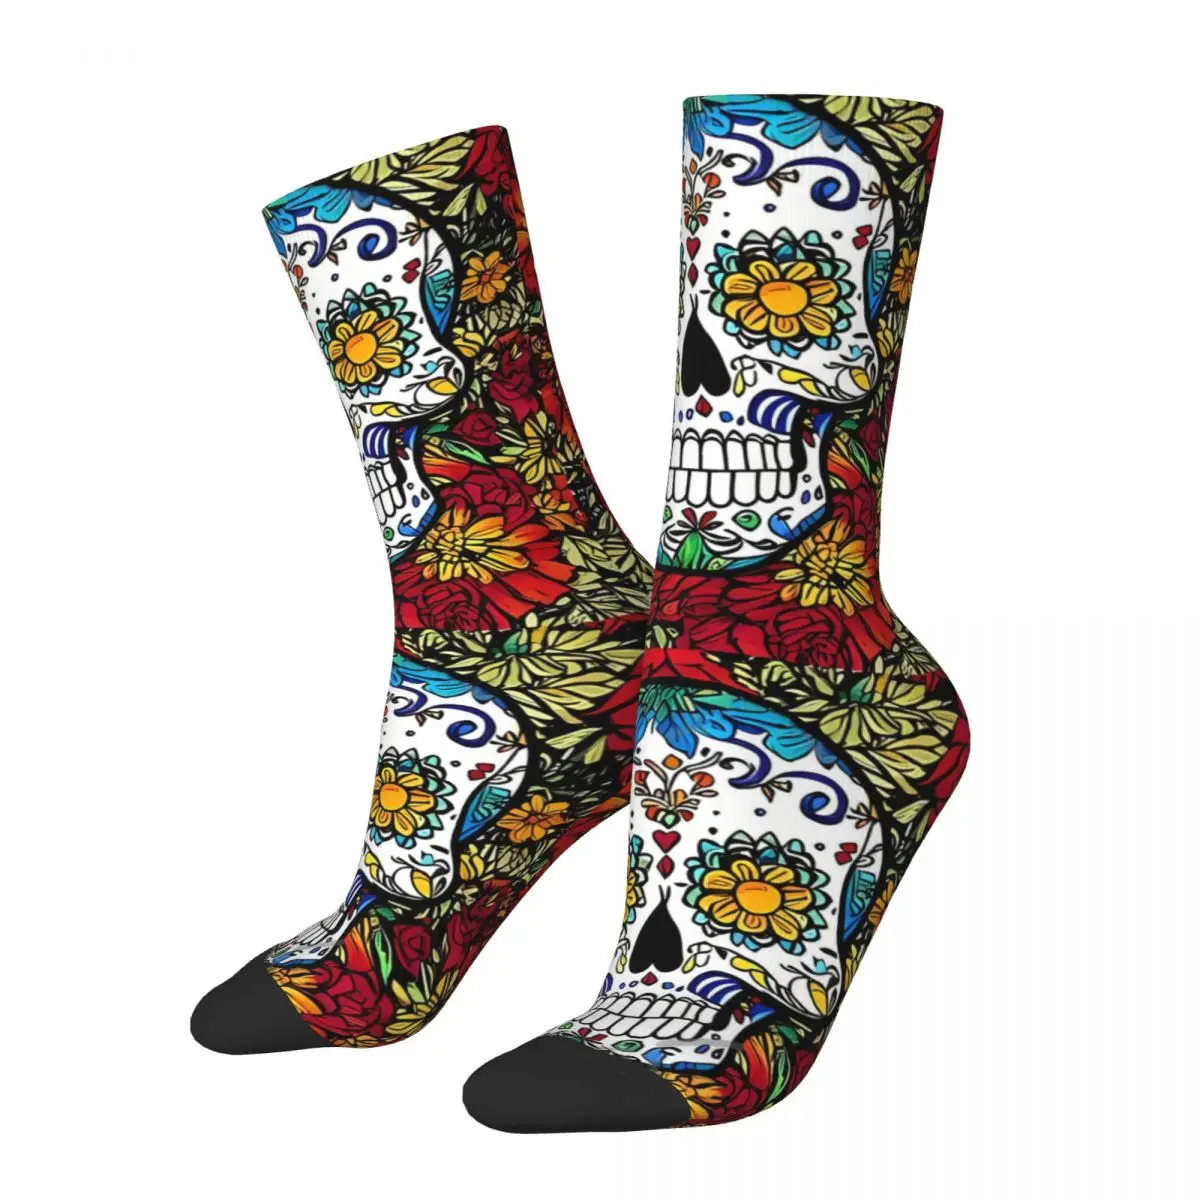 

Funny Crazy Sock for Men Skull In Color Vintage Day Of The Dead Mexico Skull Quality Pattern Printed Crew Sock Novelty Gift